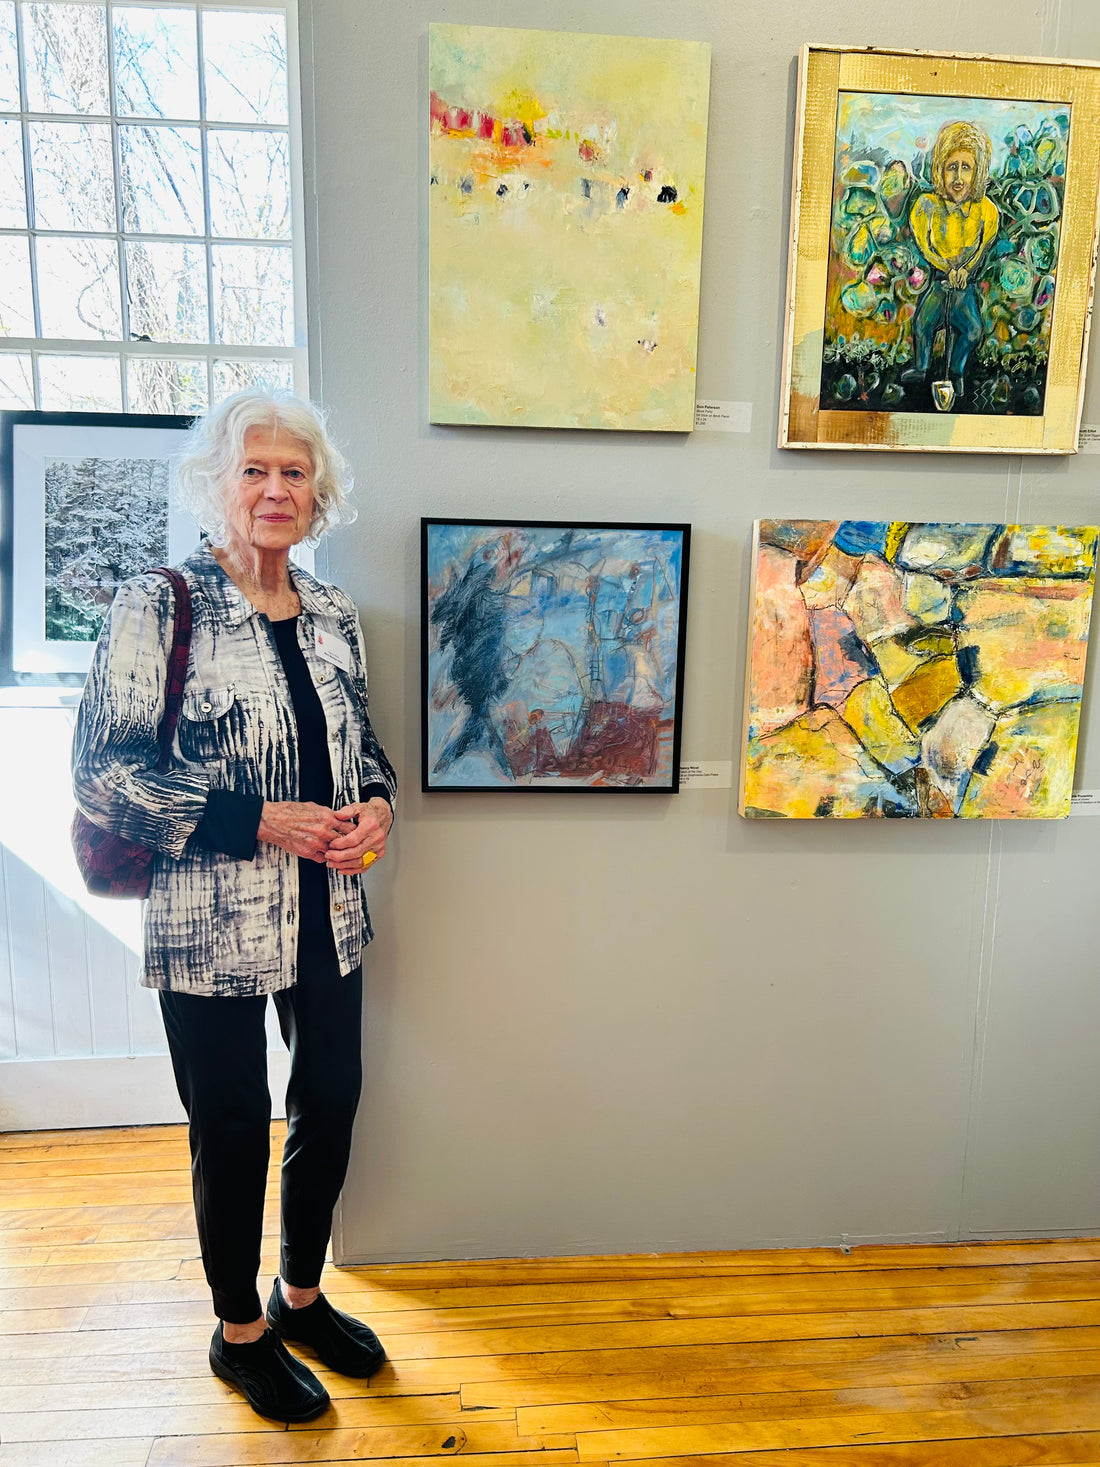 Maine Art Gallery Juried Show "Generations"